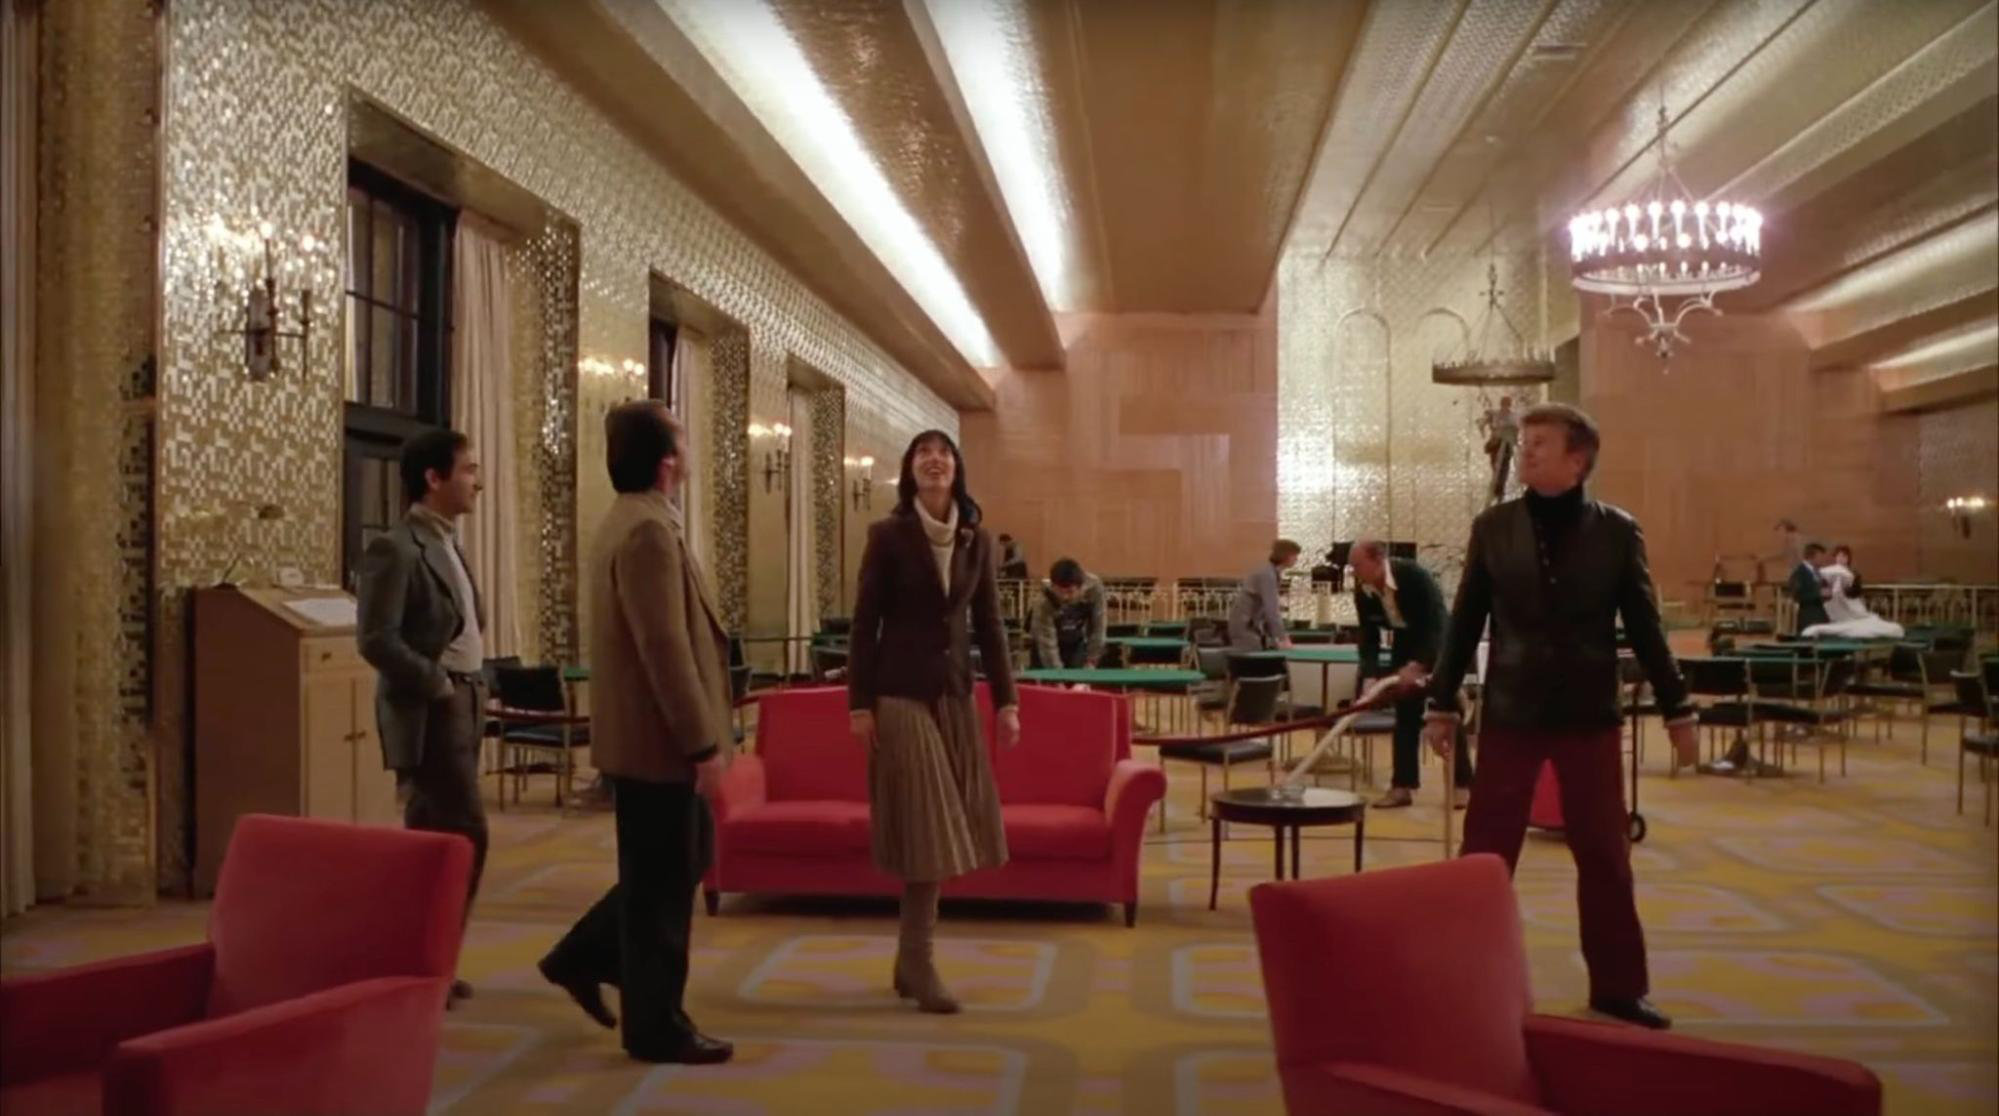 Admiring the Overlook in The Shining: parallel tracking shot while the protagonists are moving